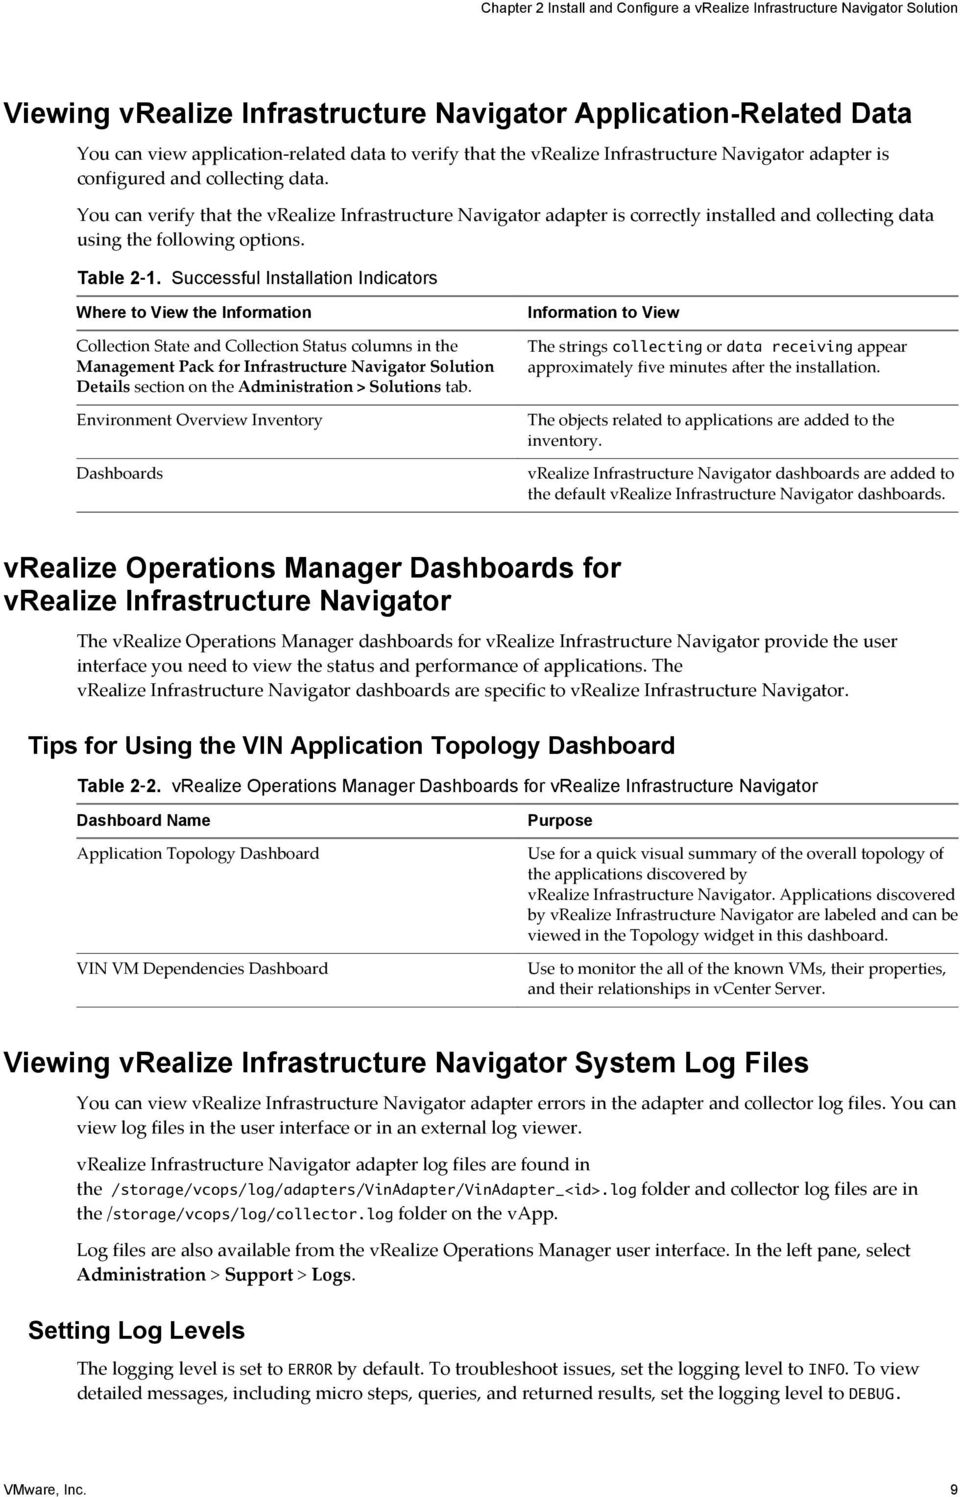 You can verify that the vrealize Infrastructure Navigator adapter is correctly installed and collecting data using the following options. Table 2 1.